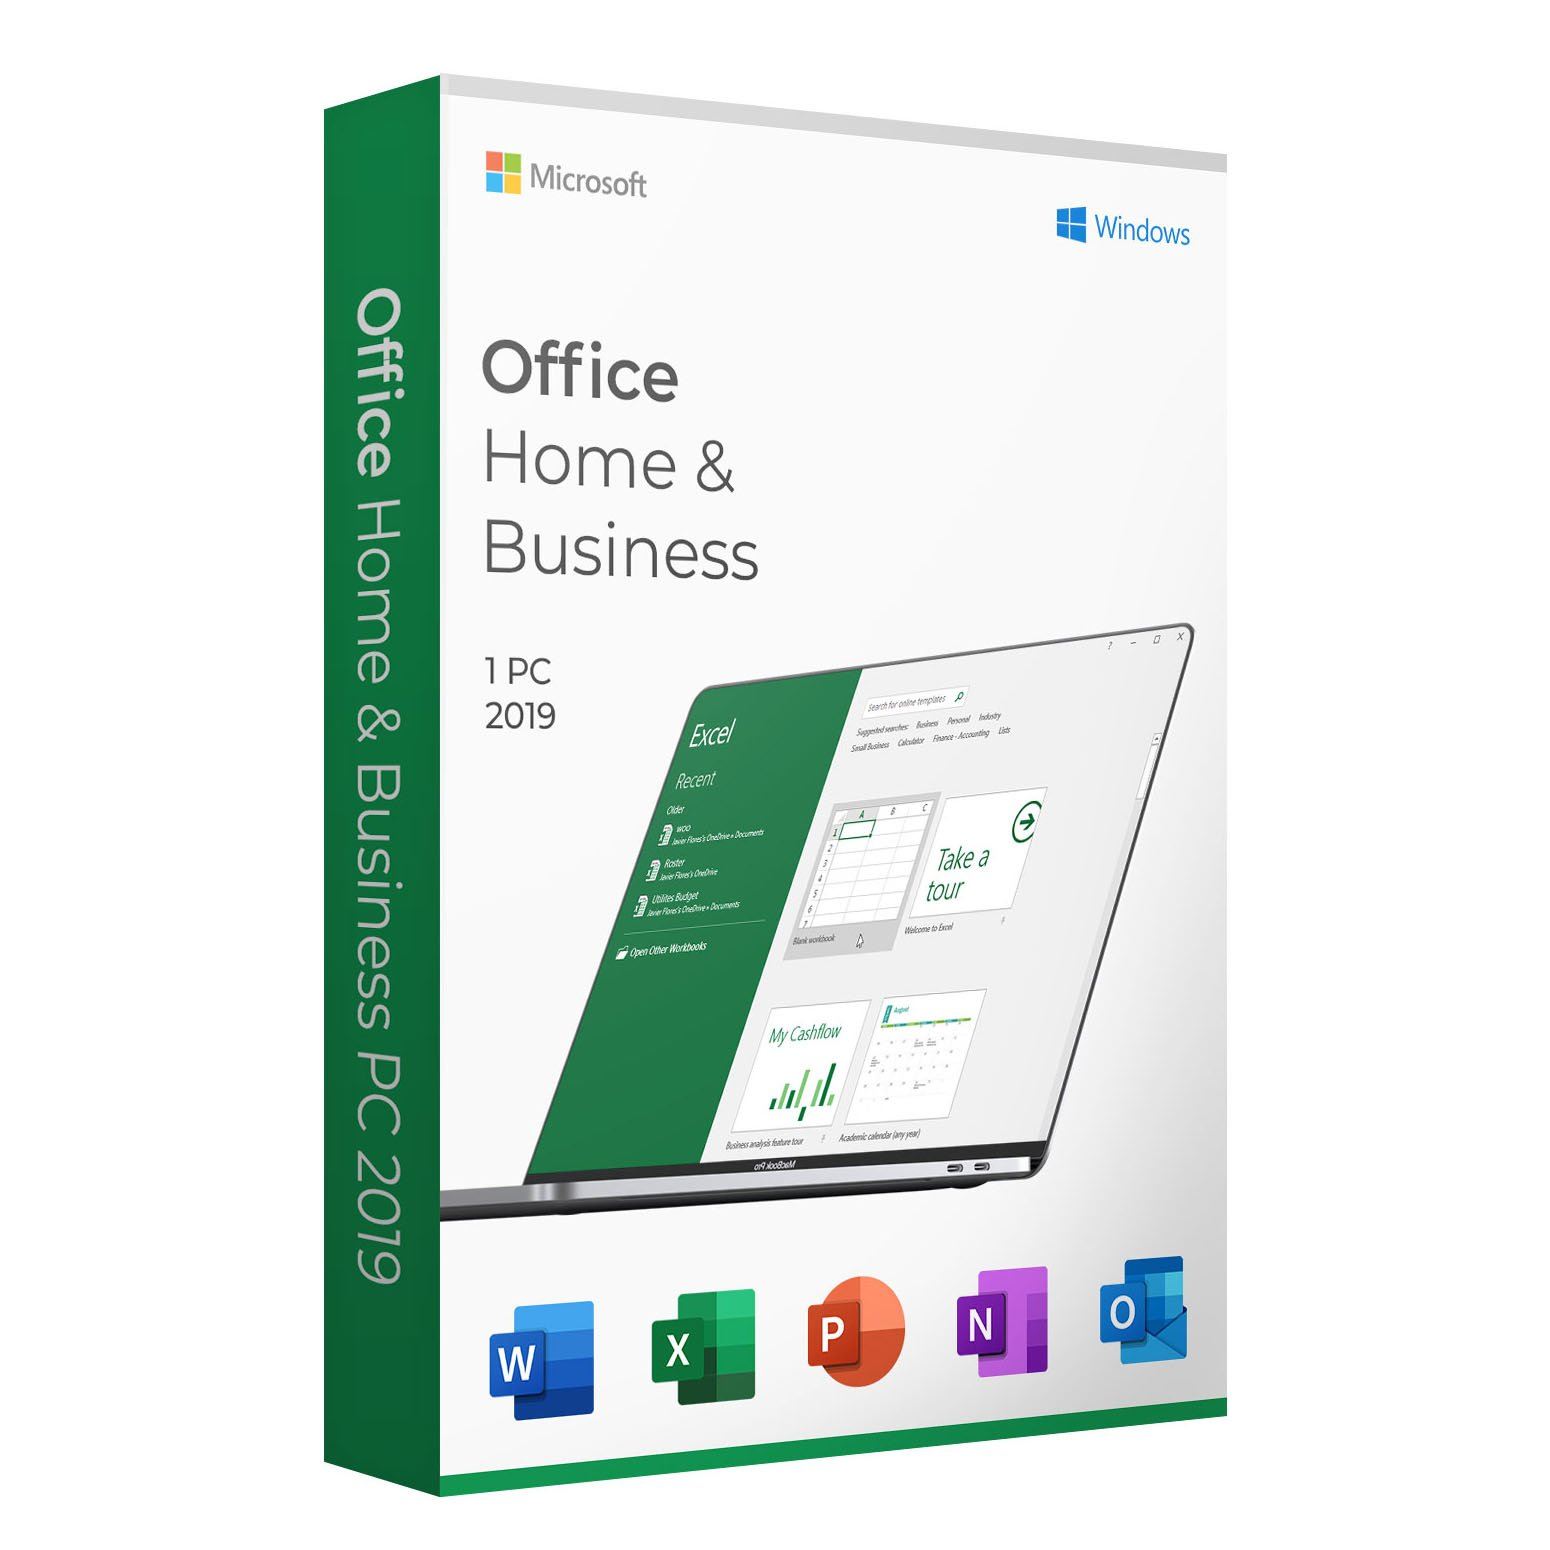 Home business 2021. Microsoft Office 2019 Home and Business. Office 2019 Home and Business Box. Офисное приложение MS Office Home and Business 2021 professional Plus. Microsoft Office 2019 Home and Business for Mac.